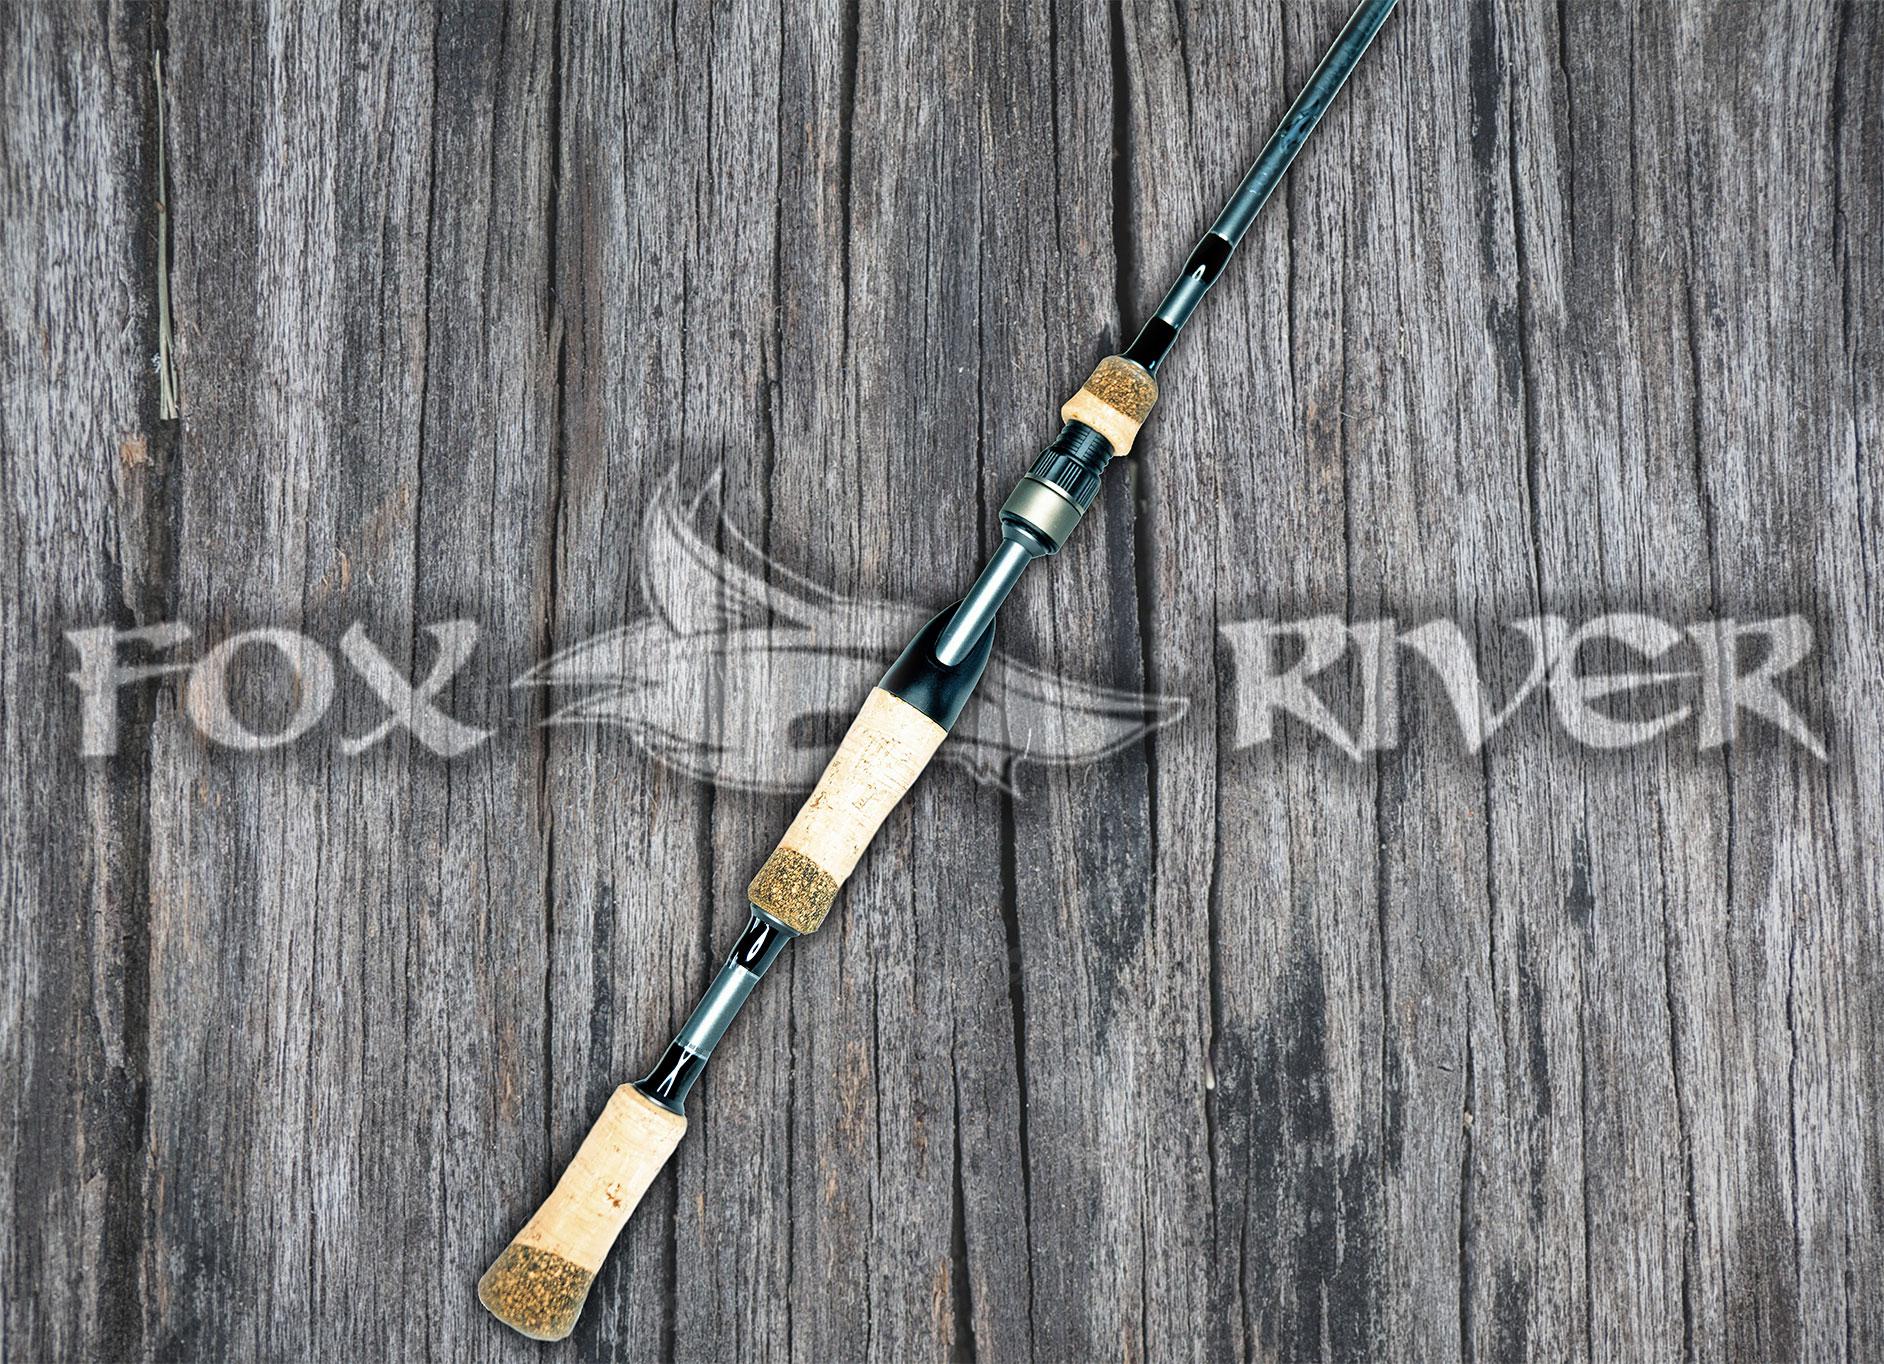 Fox River Lures and Rods - 6' 2 Ultralight Split-Grip Spinning Rod